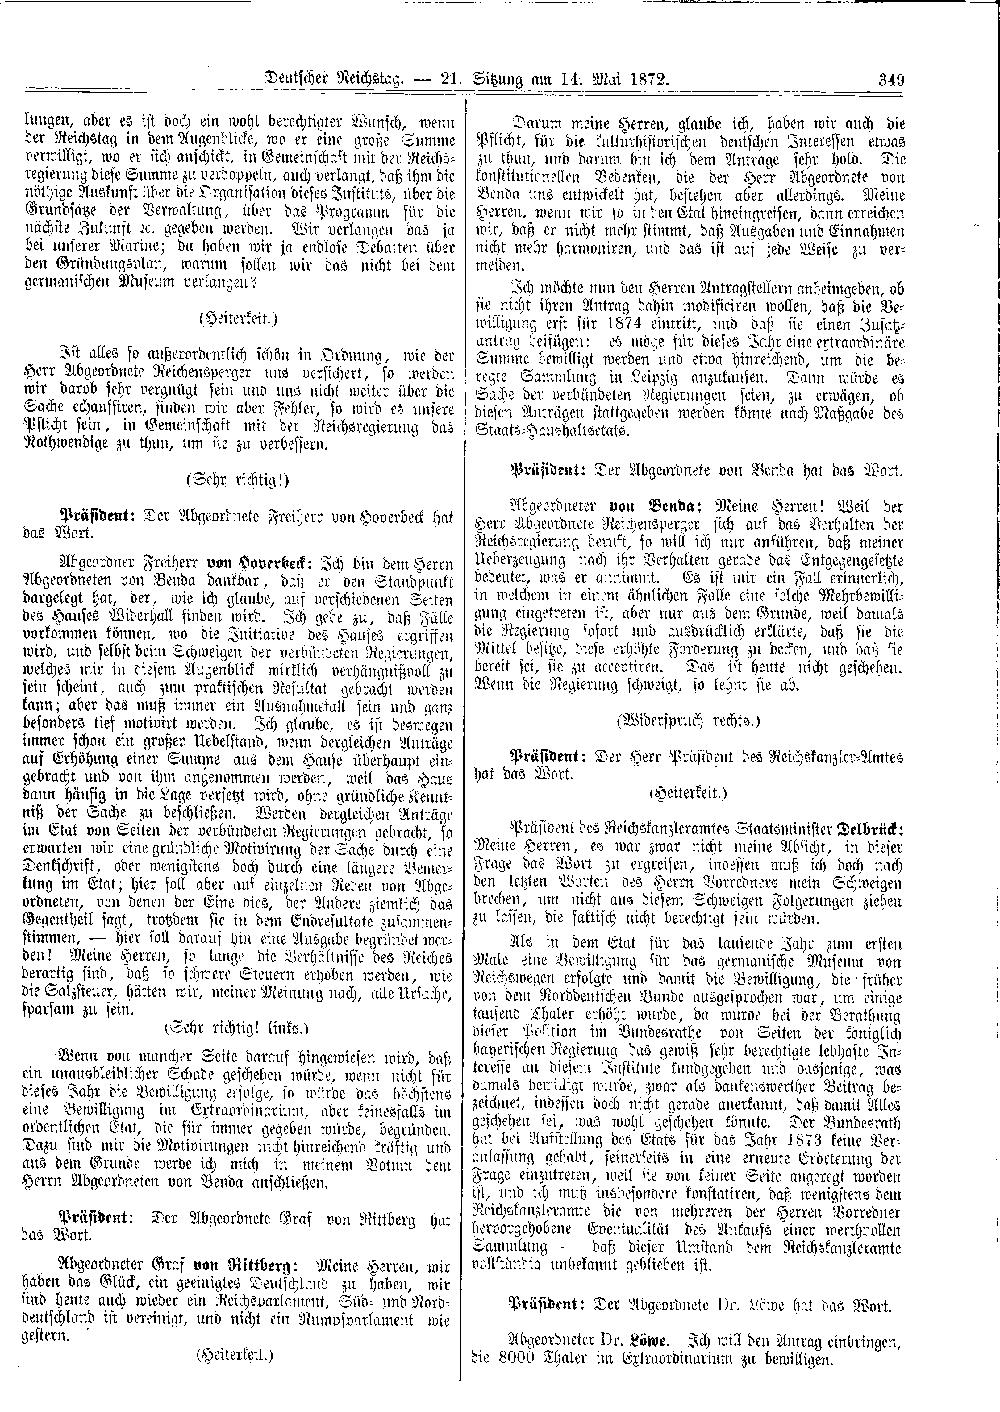 Scan of page 349